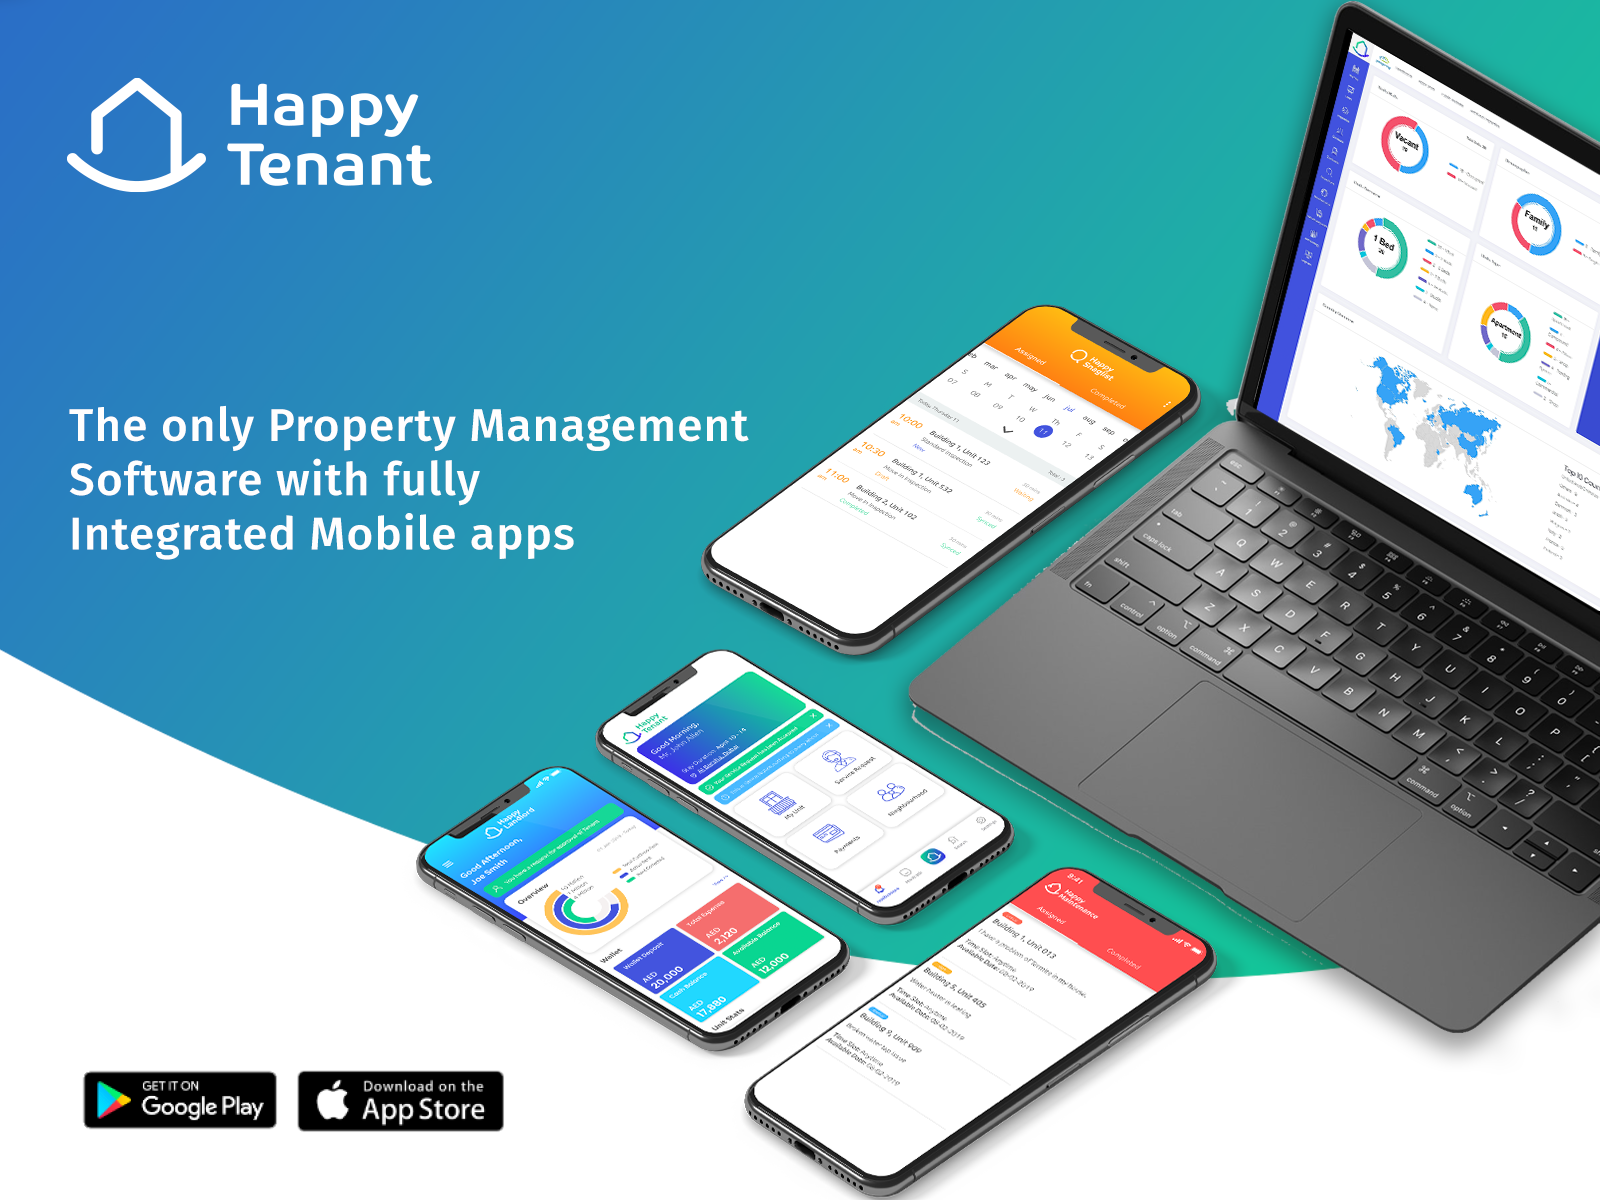 HappyTenant Software - An end-to-end property management eco-system with separate mobile apps for each stakeholder.